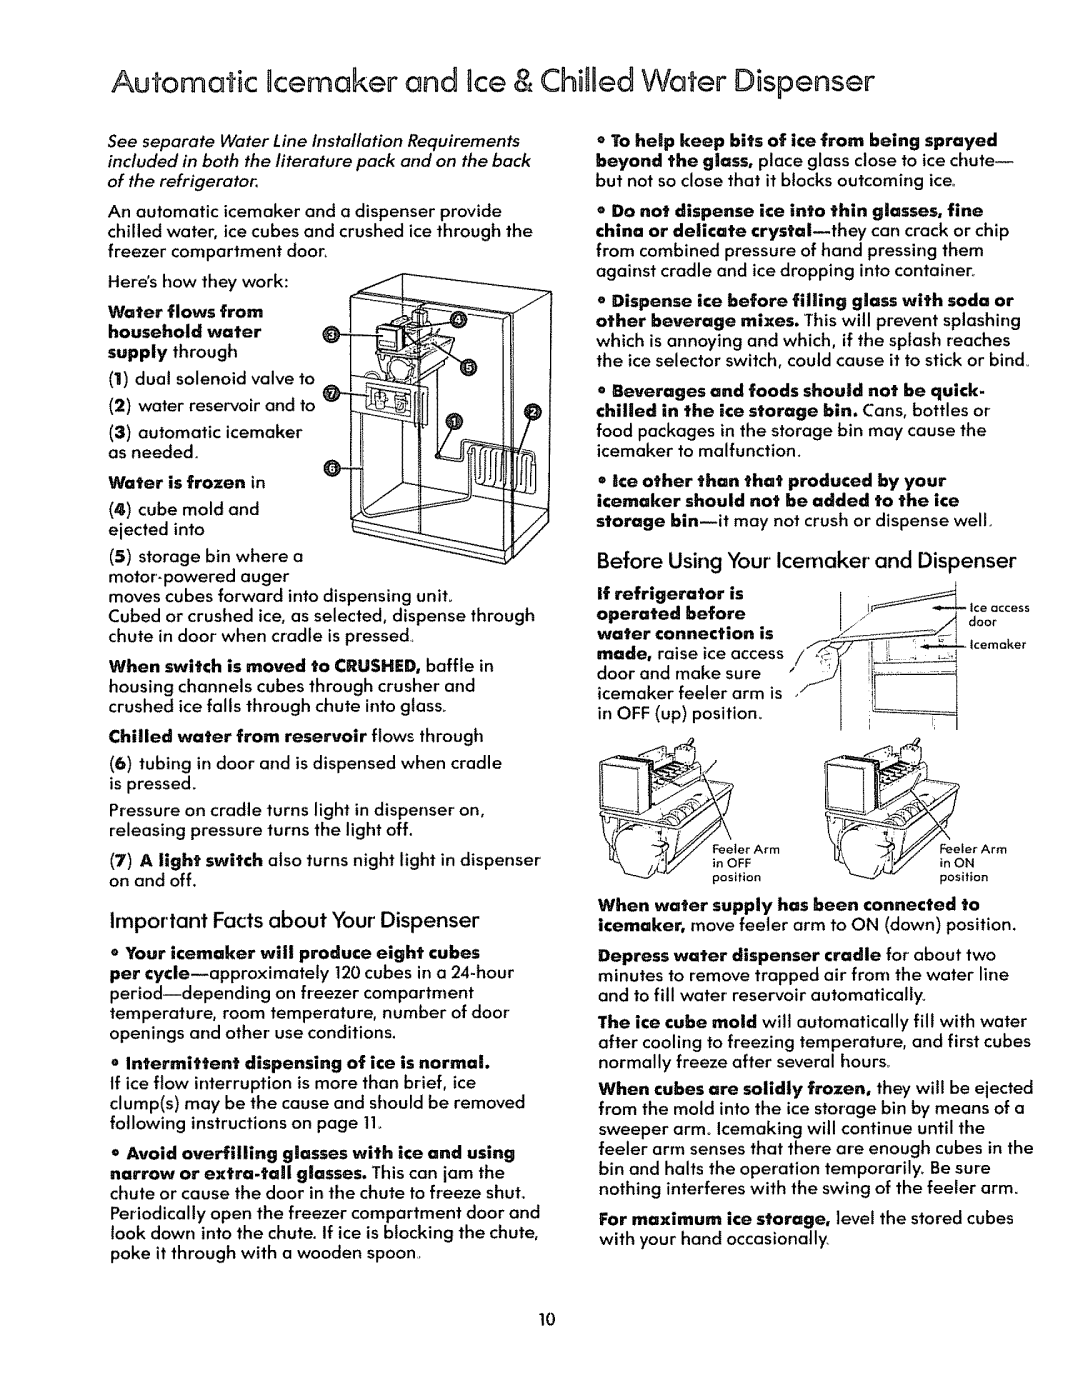 Kenmore 59778, 59771 warranty Important Facts about YourDispenser, Before Using Your Icemaker and Dis enser, household 